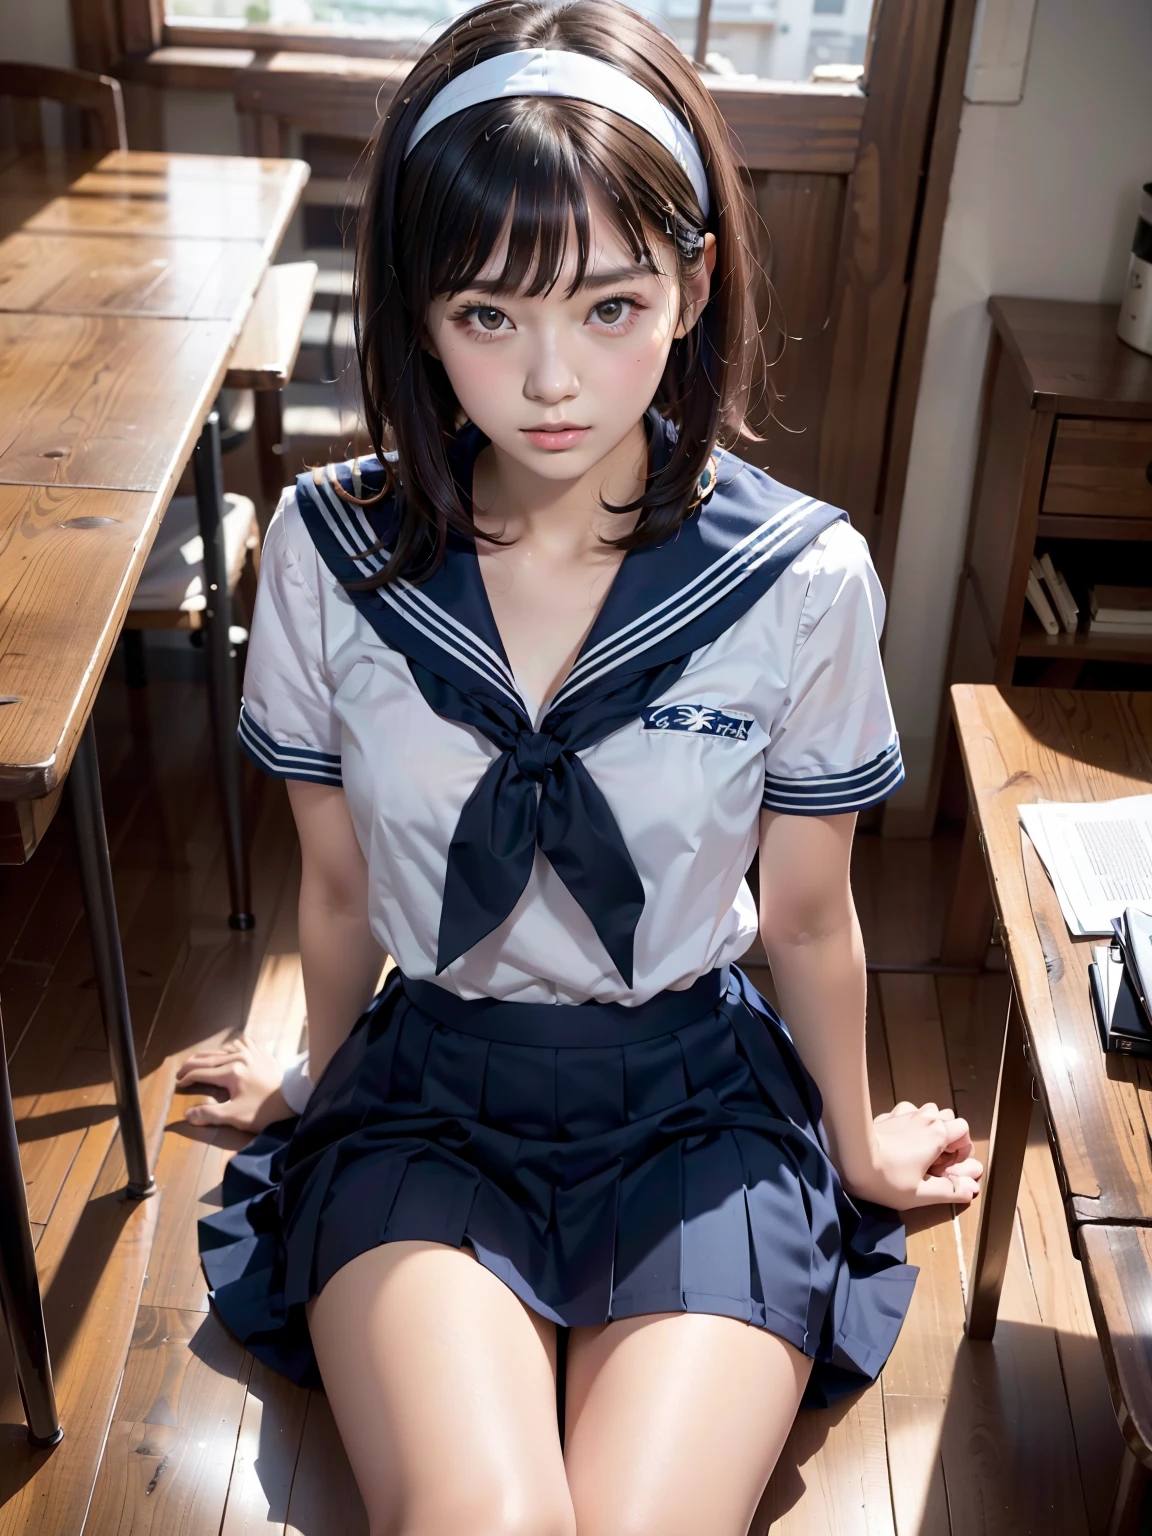 sailor suit, 8K, highest quality, masterpiece, Super detailed, ultra high resolution, realistic, RAW photo, absolute resolution, face is small compared to body, very small face, black hair,  navy blue sailor uniform, Dark blue skirt, 3D rendering, realistic young school girl, ((white headband)), small breasts, expensive, slanted eyes, (school scenery), black stockings, open your mouth, bob cut, position looking down from above, 